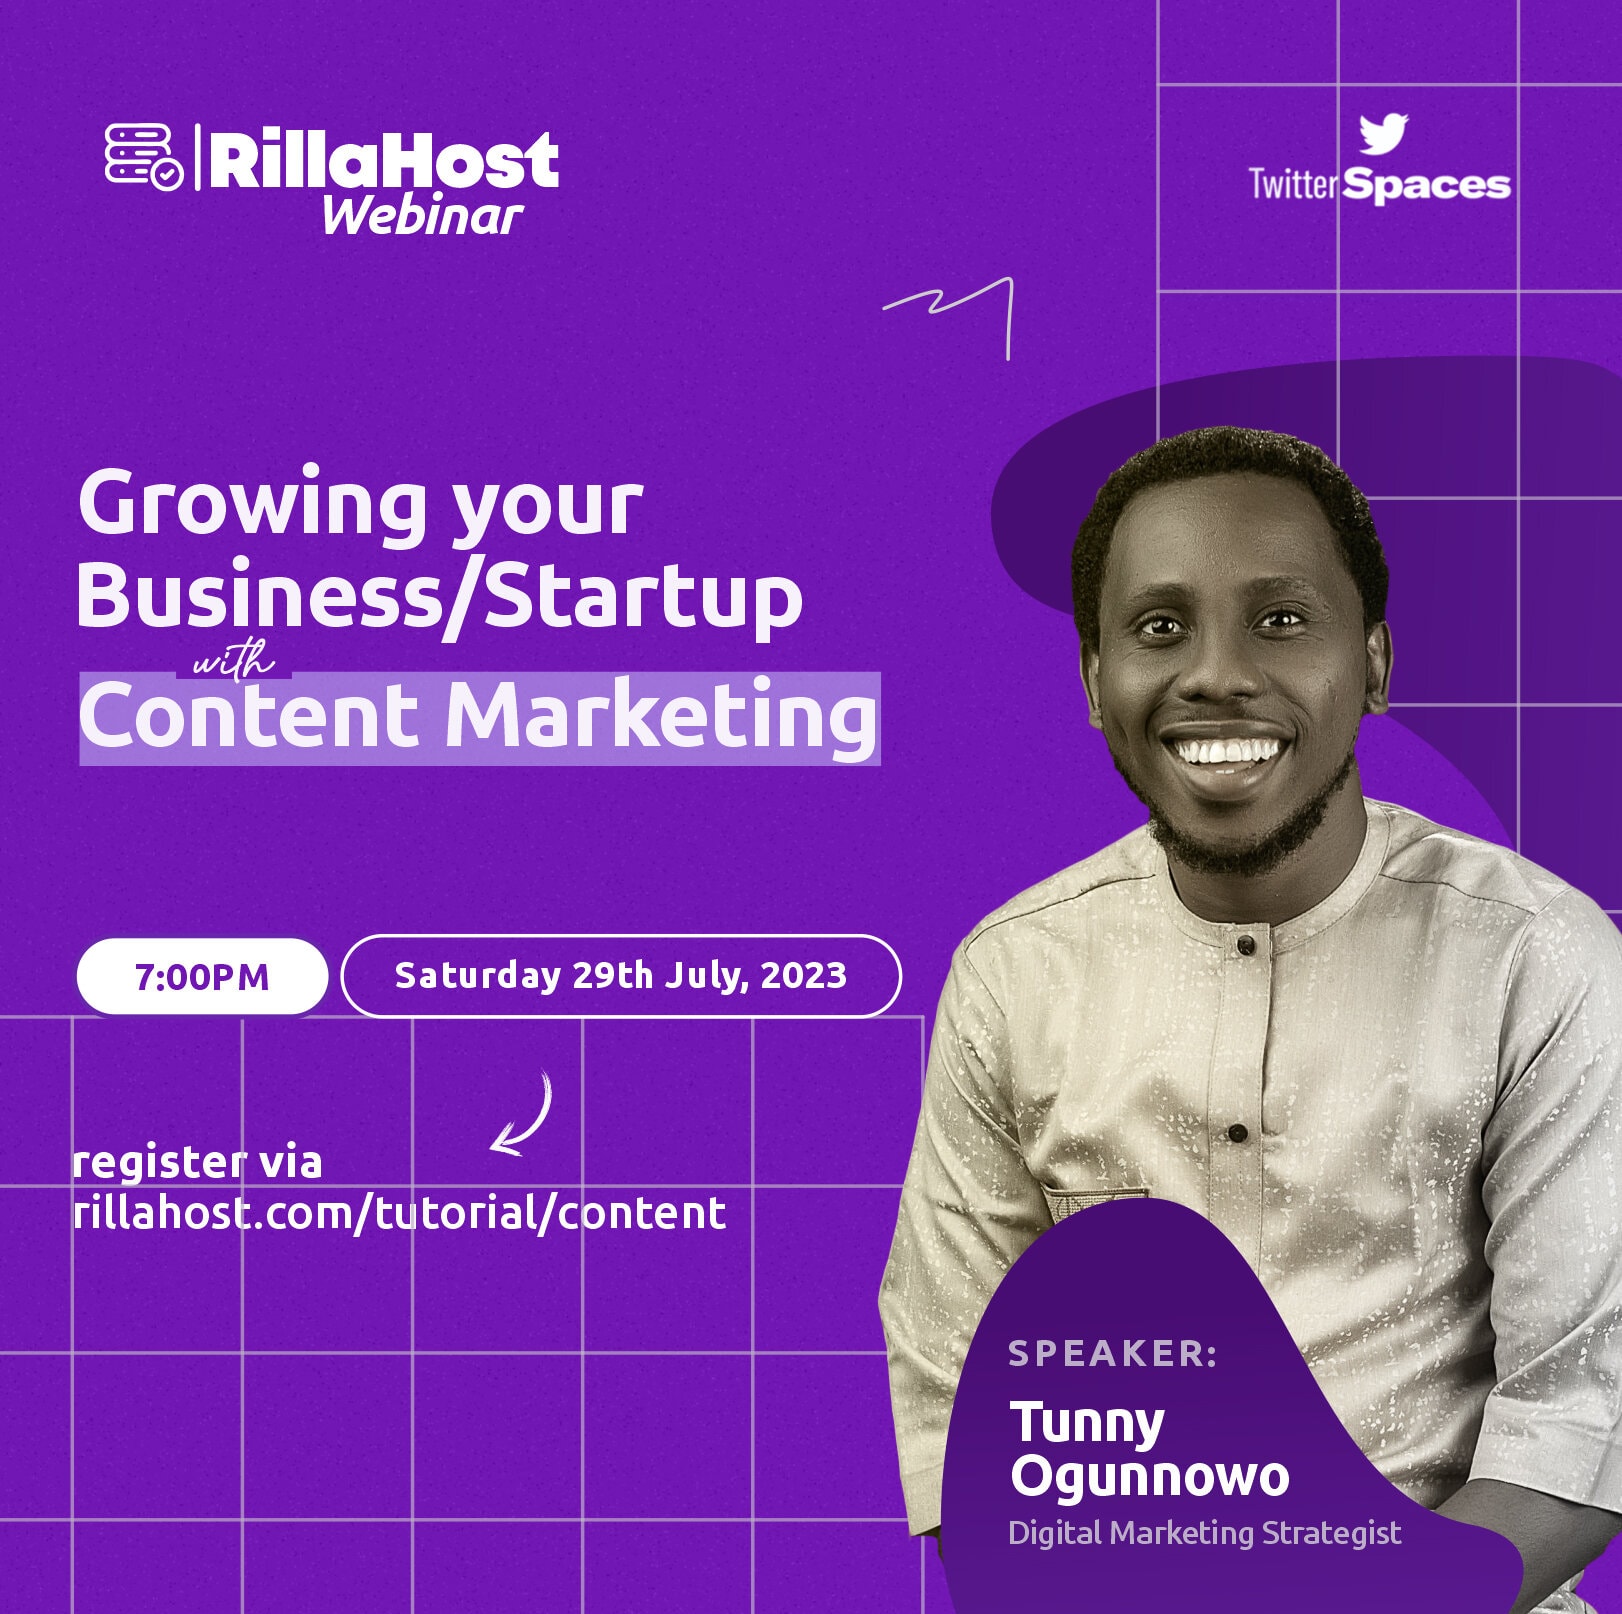 rillahost banner on content marketing.